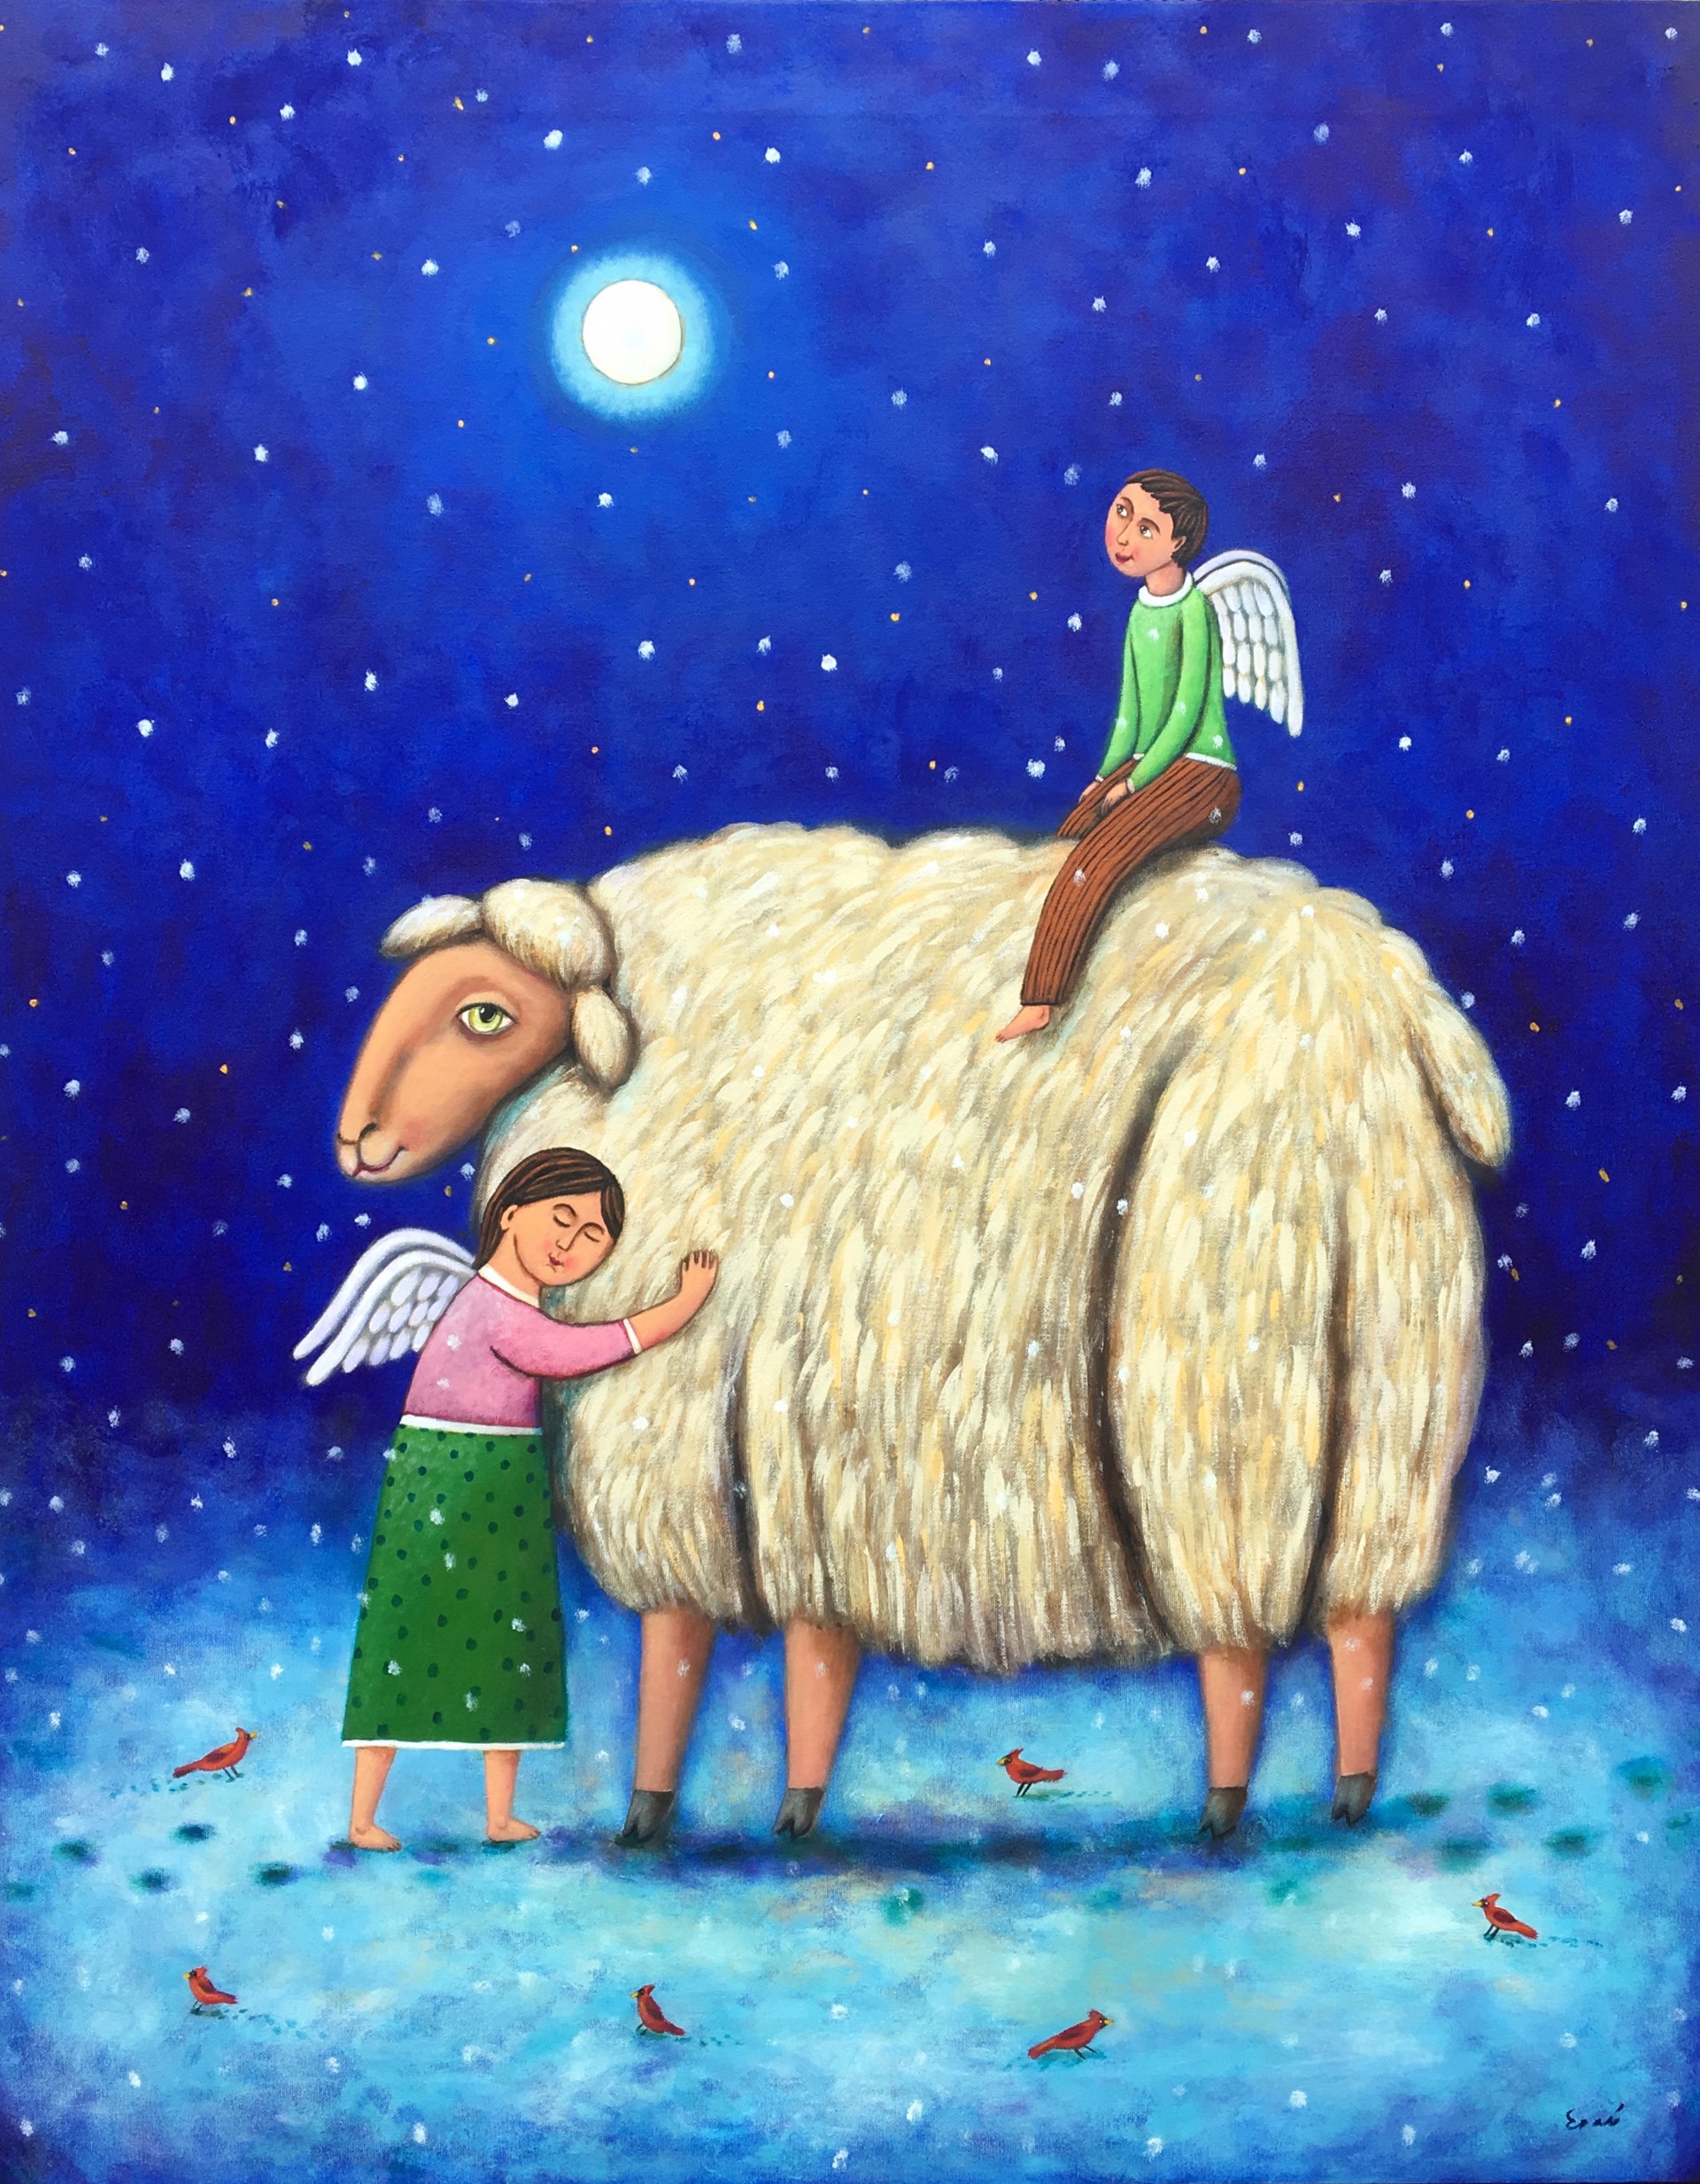 The Sheep by Esau Andrade